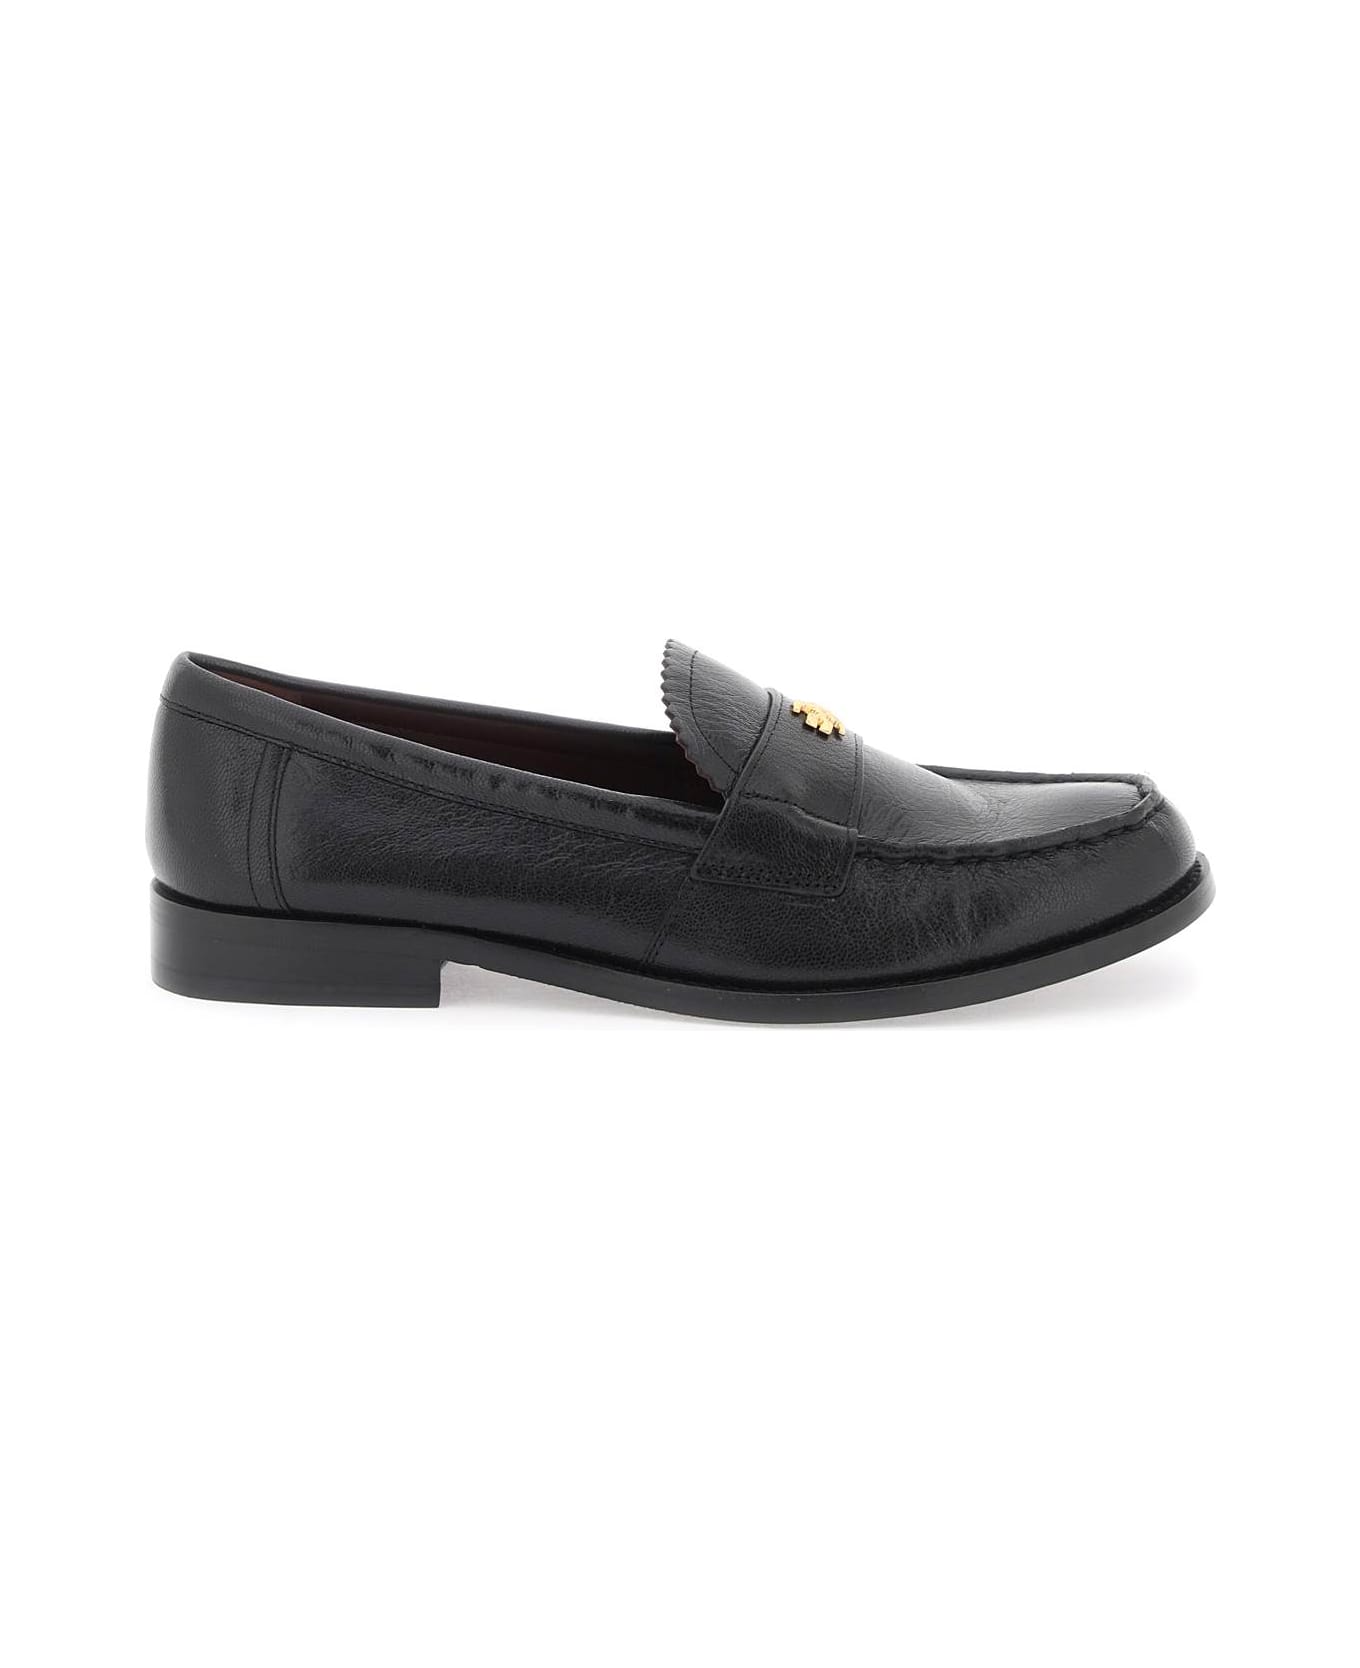 Tory Burch Perry Loafers - Black フラットシューズ